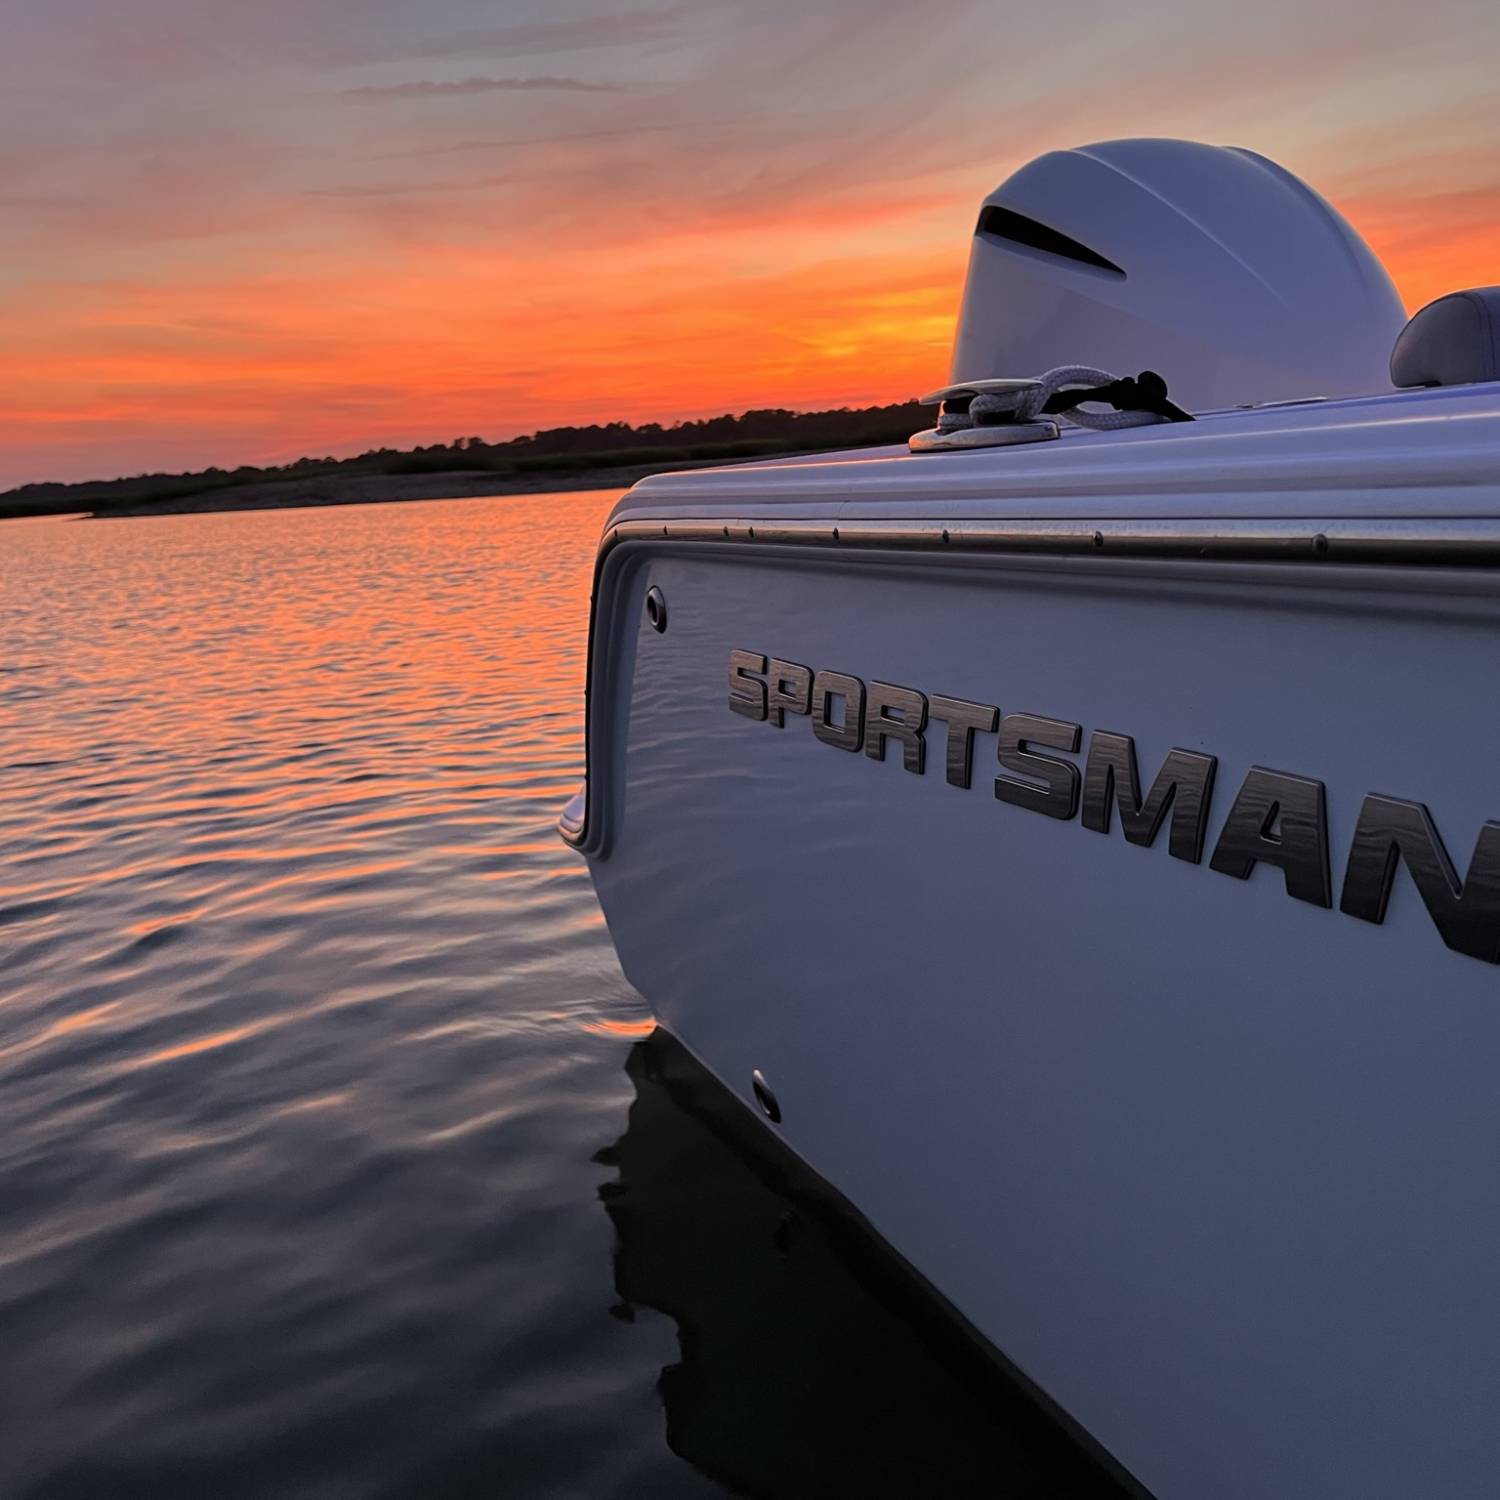 Title: Lowcountry Sunsets - On board their Sportsman Open 242 Center Console - Location: Hilton head Island , SC. Participating in the Photo Contest #SportsmanJuly